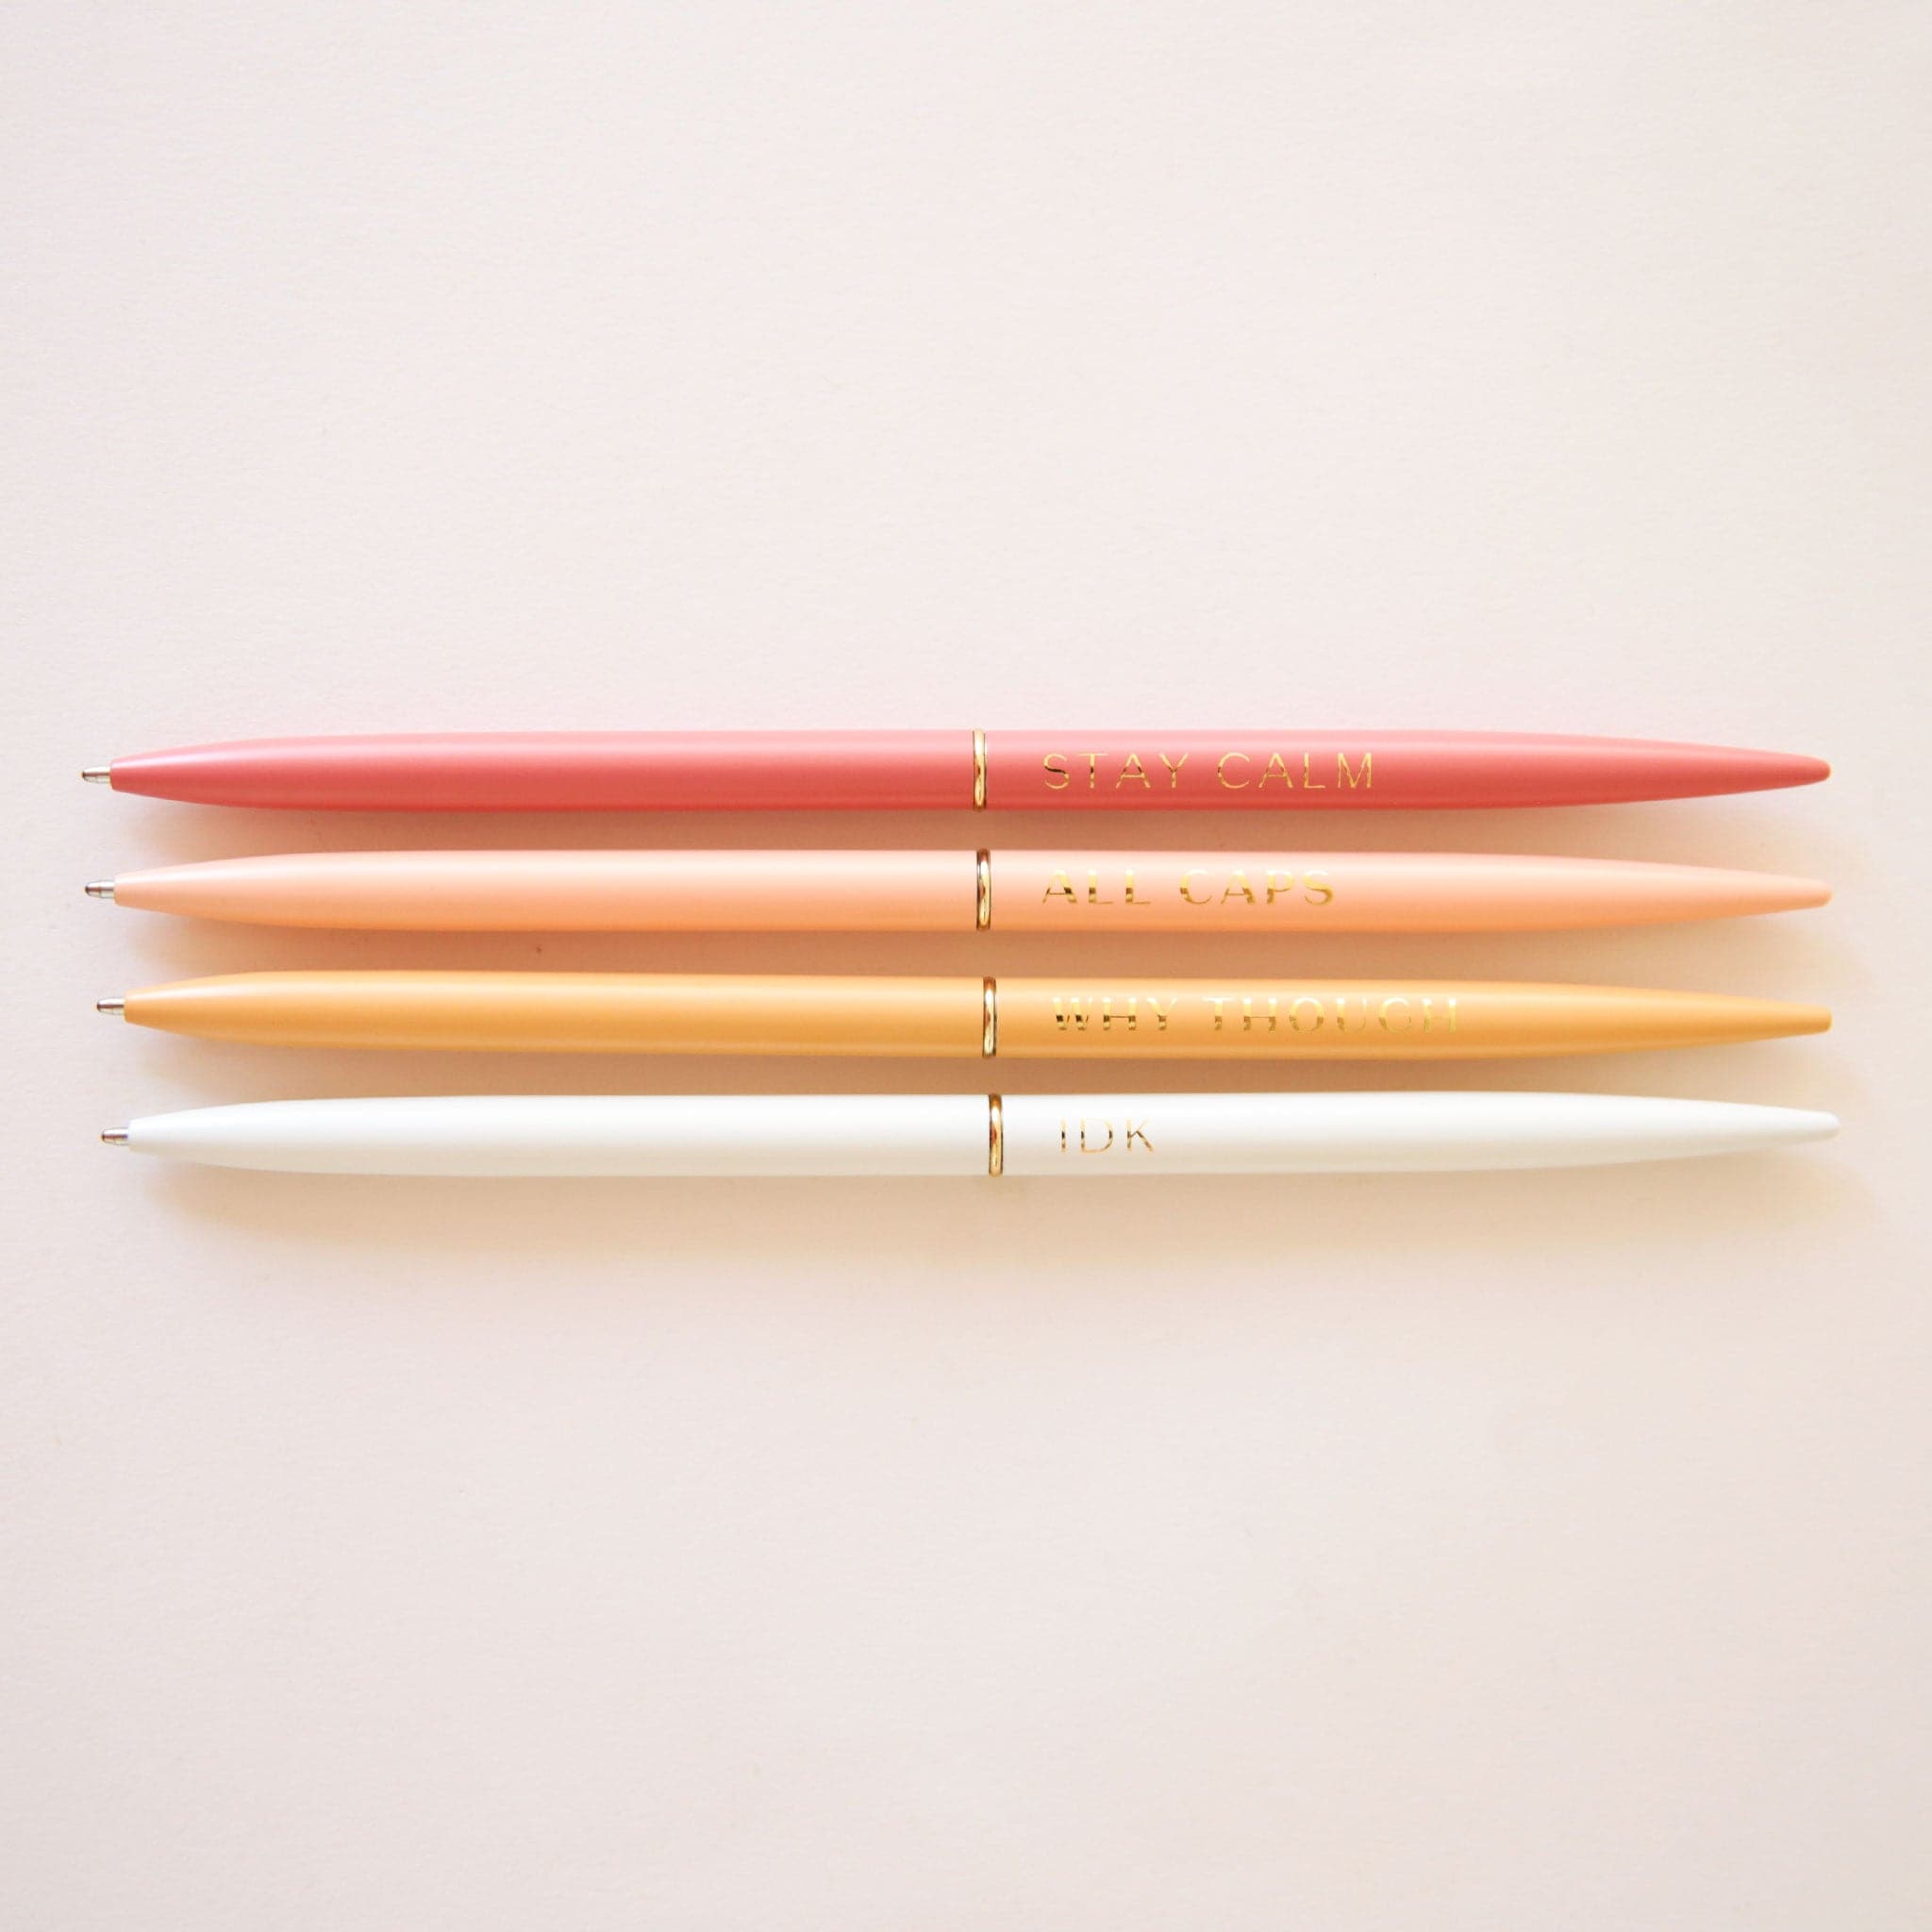 A set of 4 slender pens in yellow, white, salmon and rust. Each pen says something different. The rust pen says, "Stay Calm". The salmon pen says, "All Caps". The white pens says, "Idk". And the yellow pen says, "Why Though".